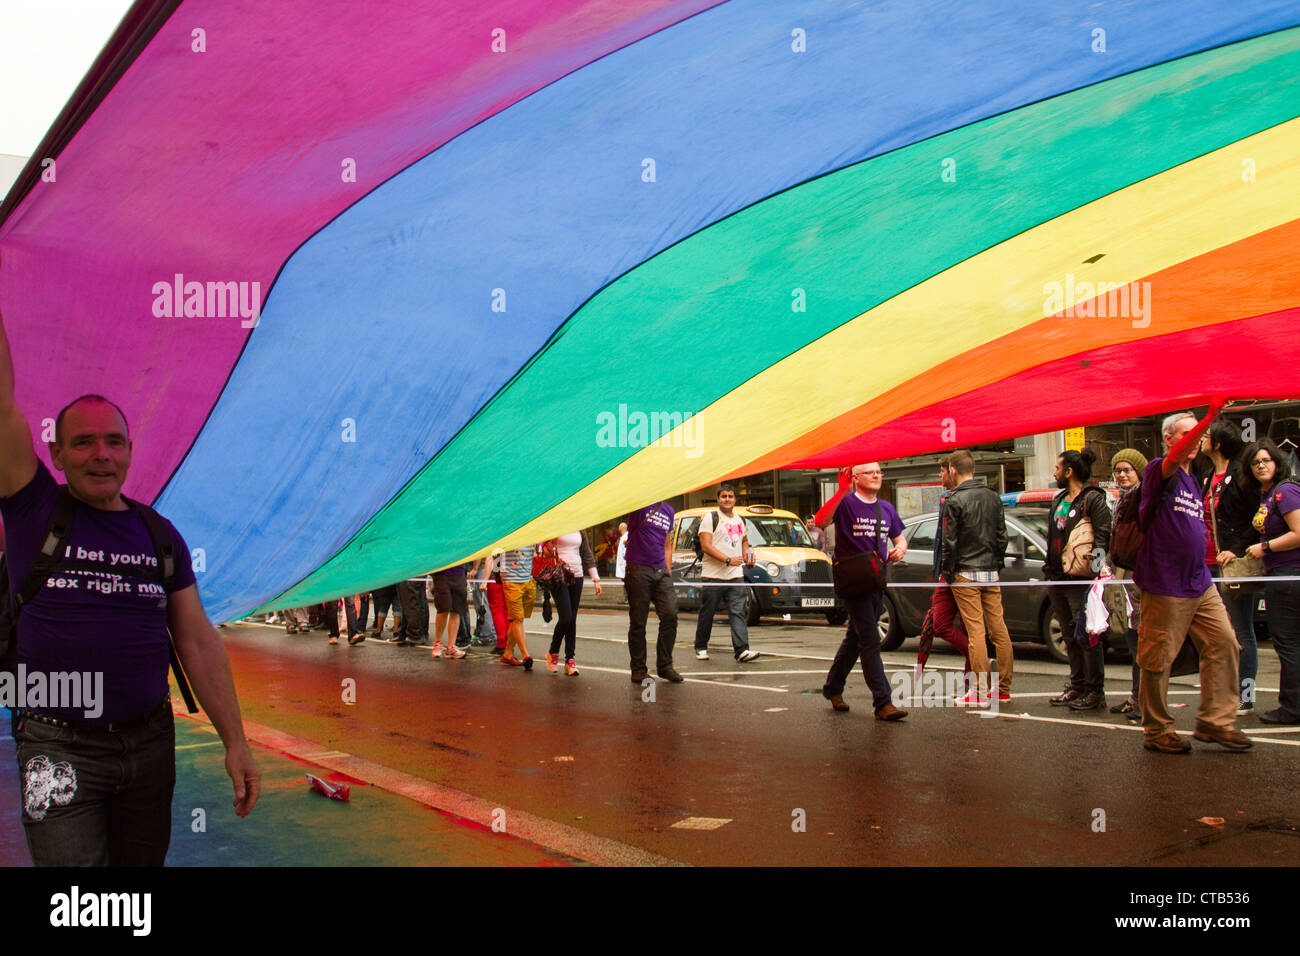 The rainbow flag at World Pride in London - 7 July 2012 Stock Photo